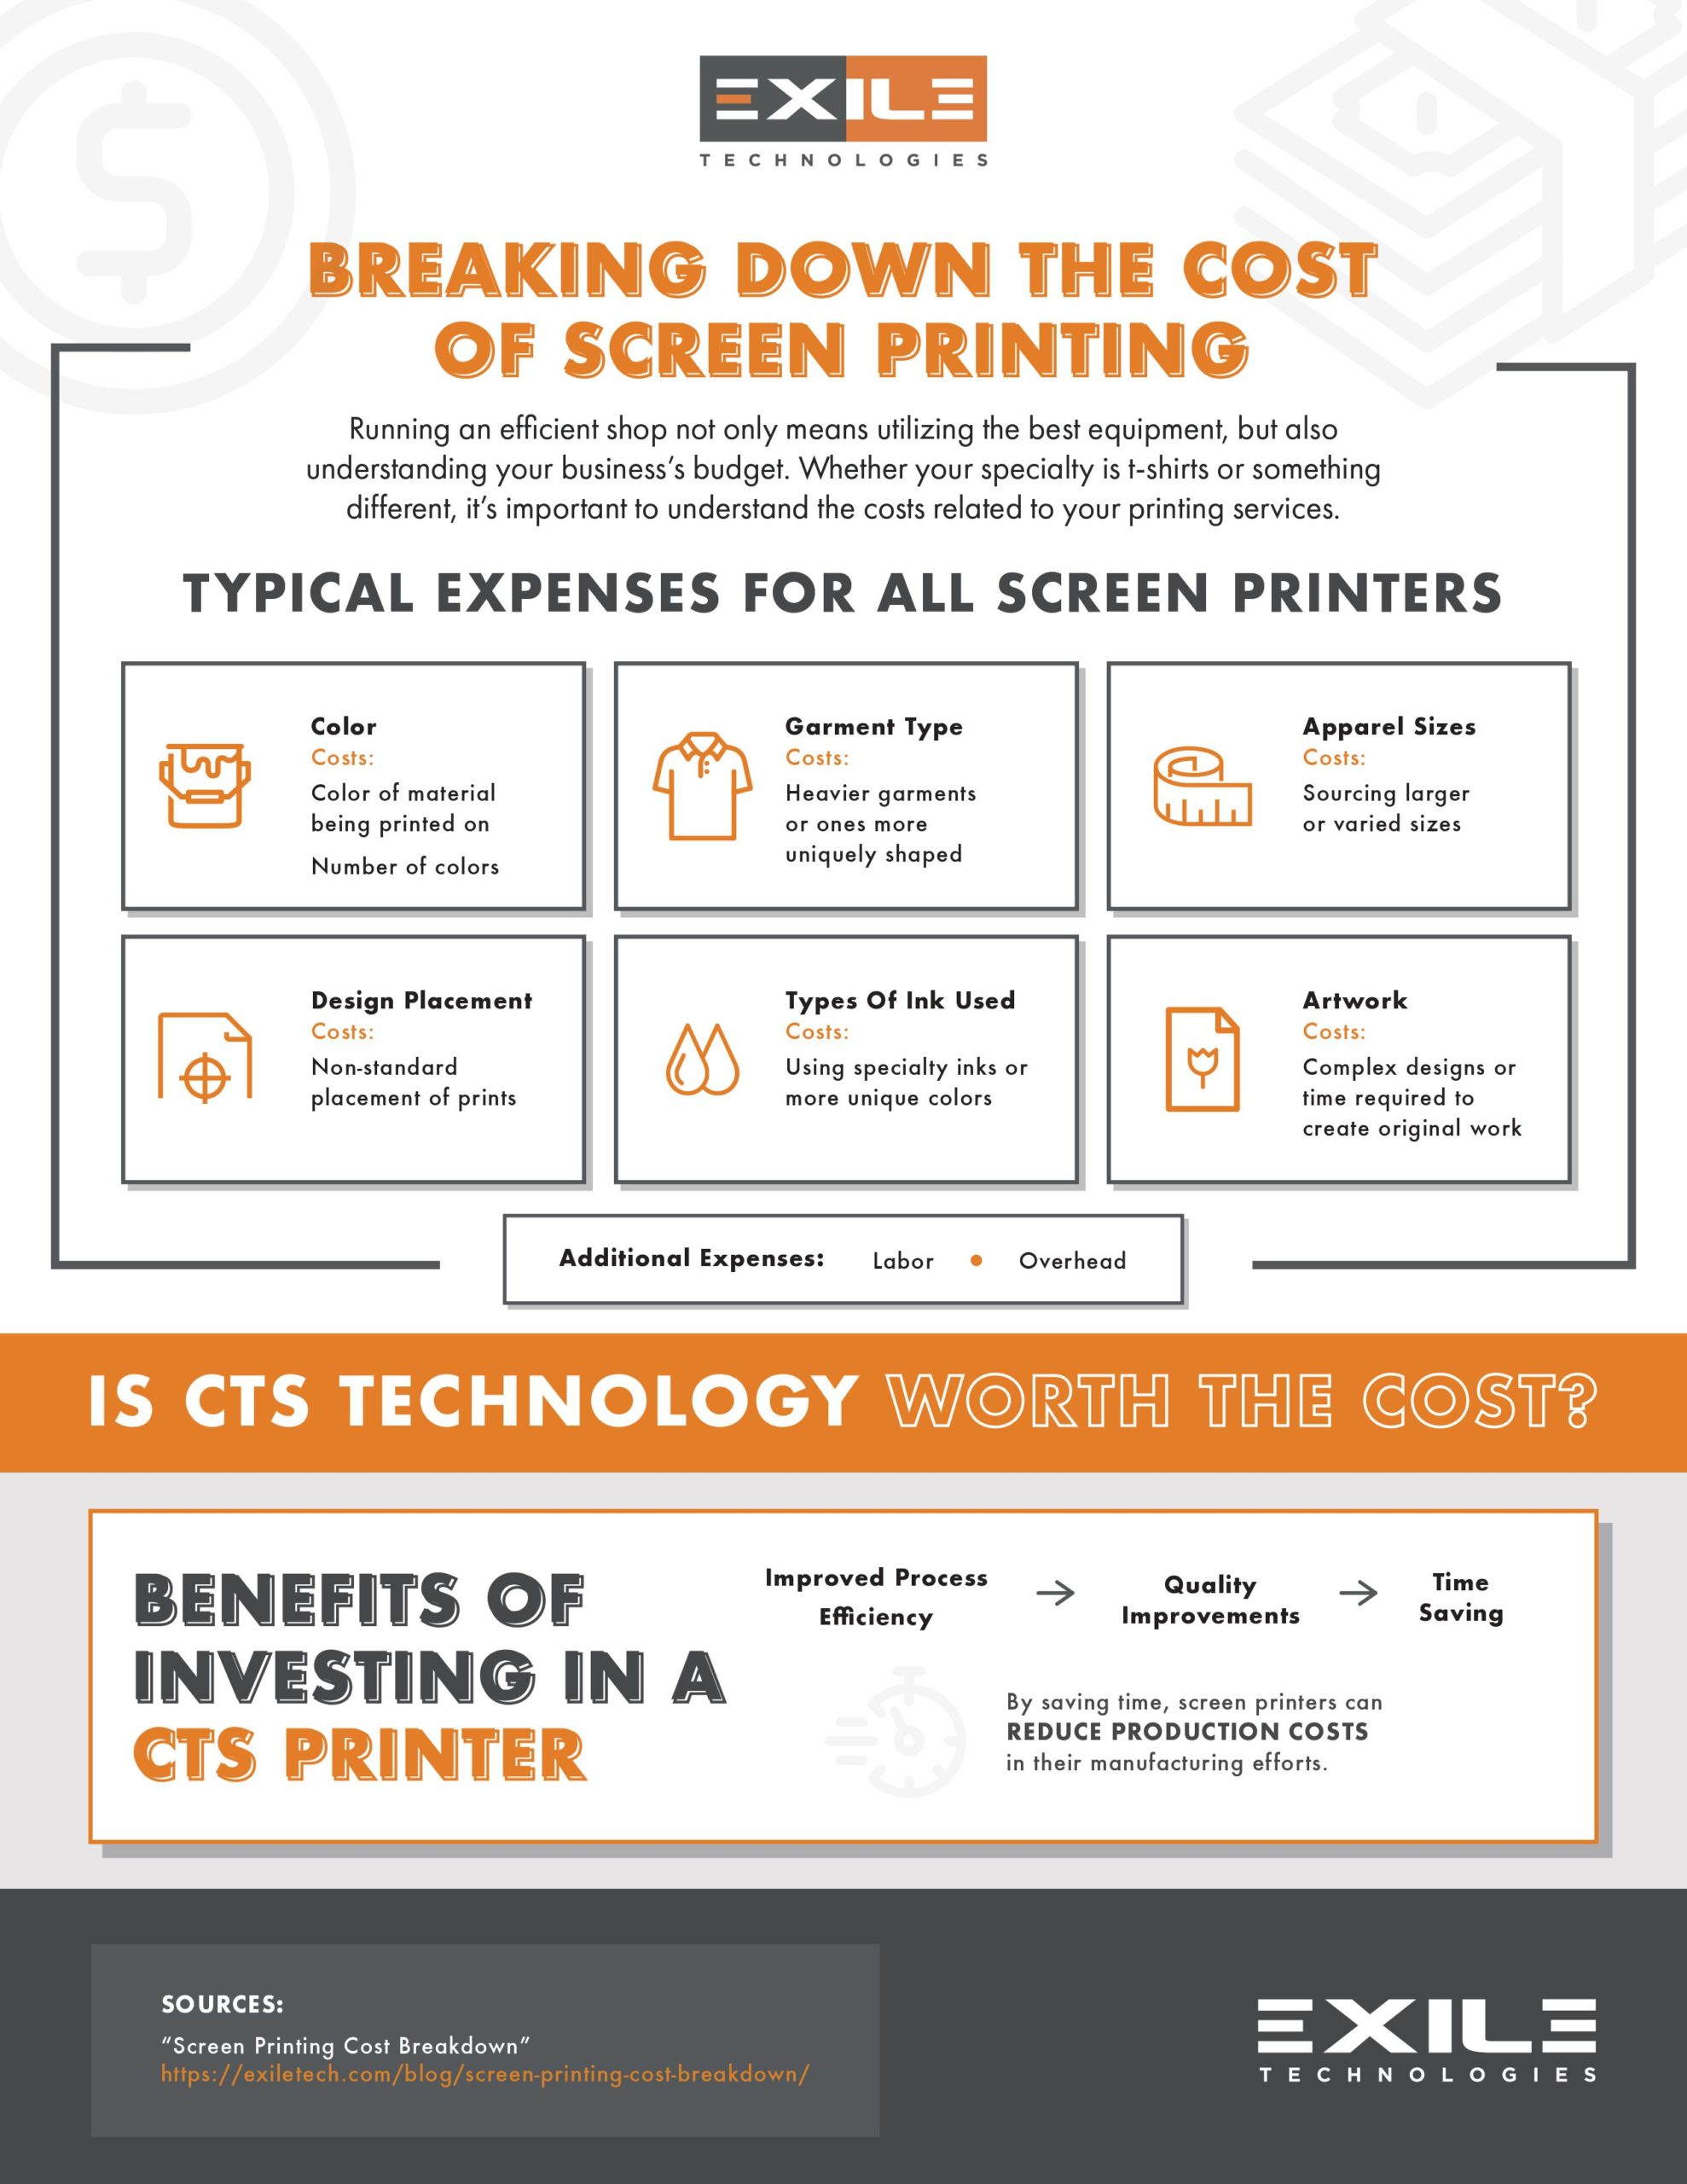 How Much Does Document Printing Cost